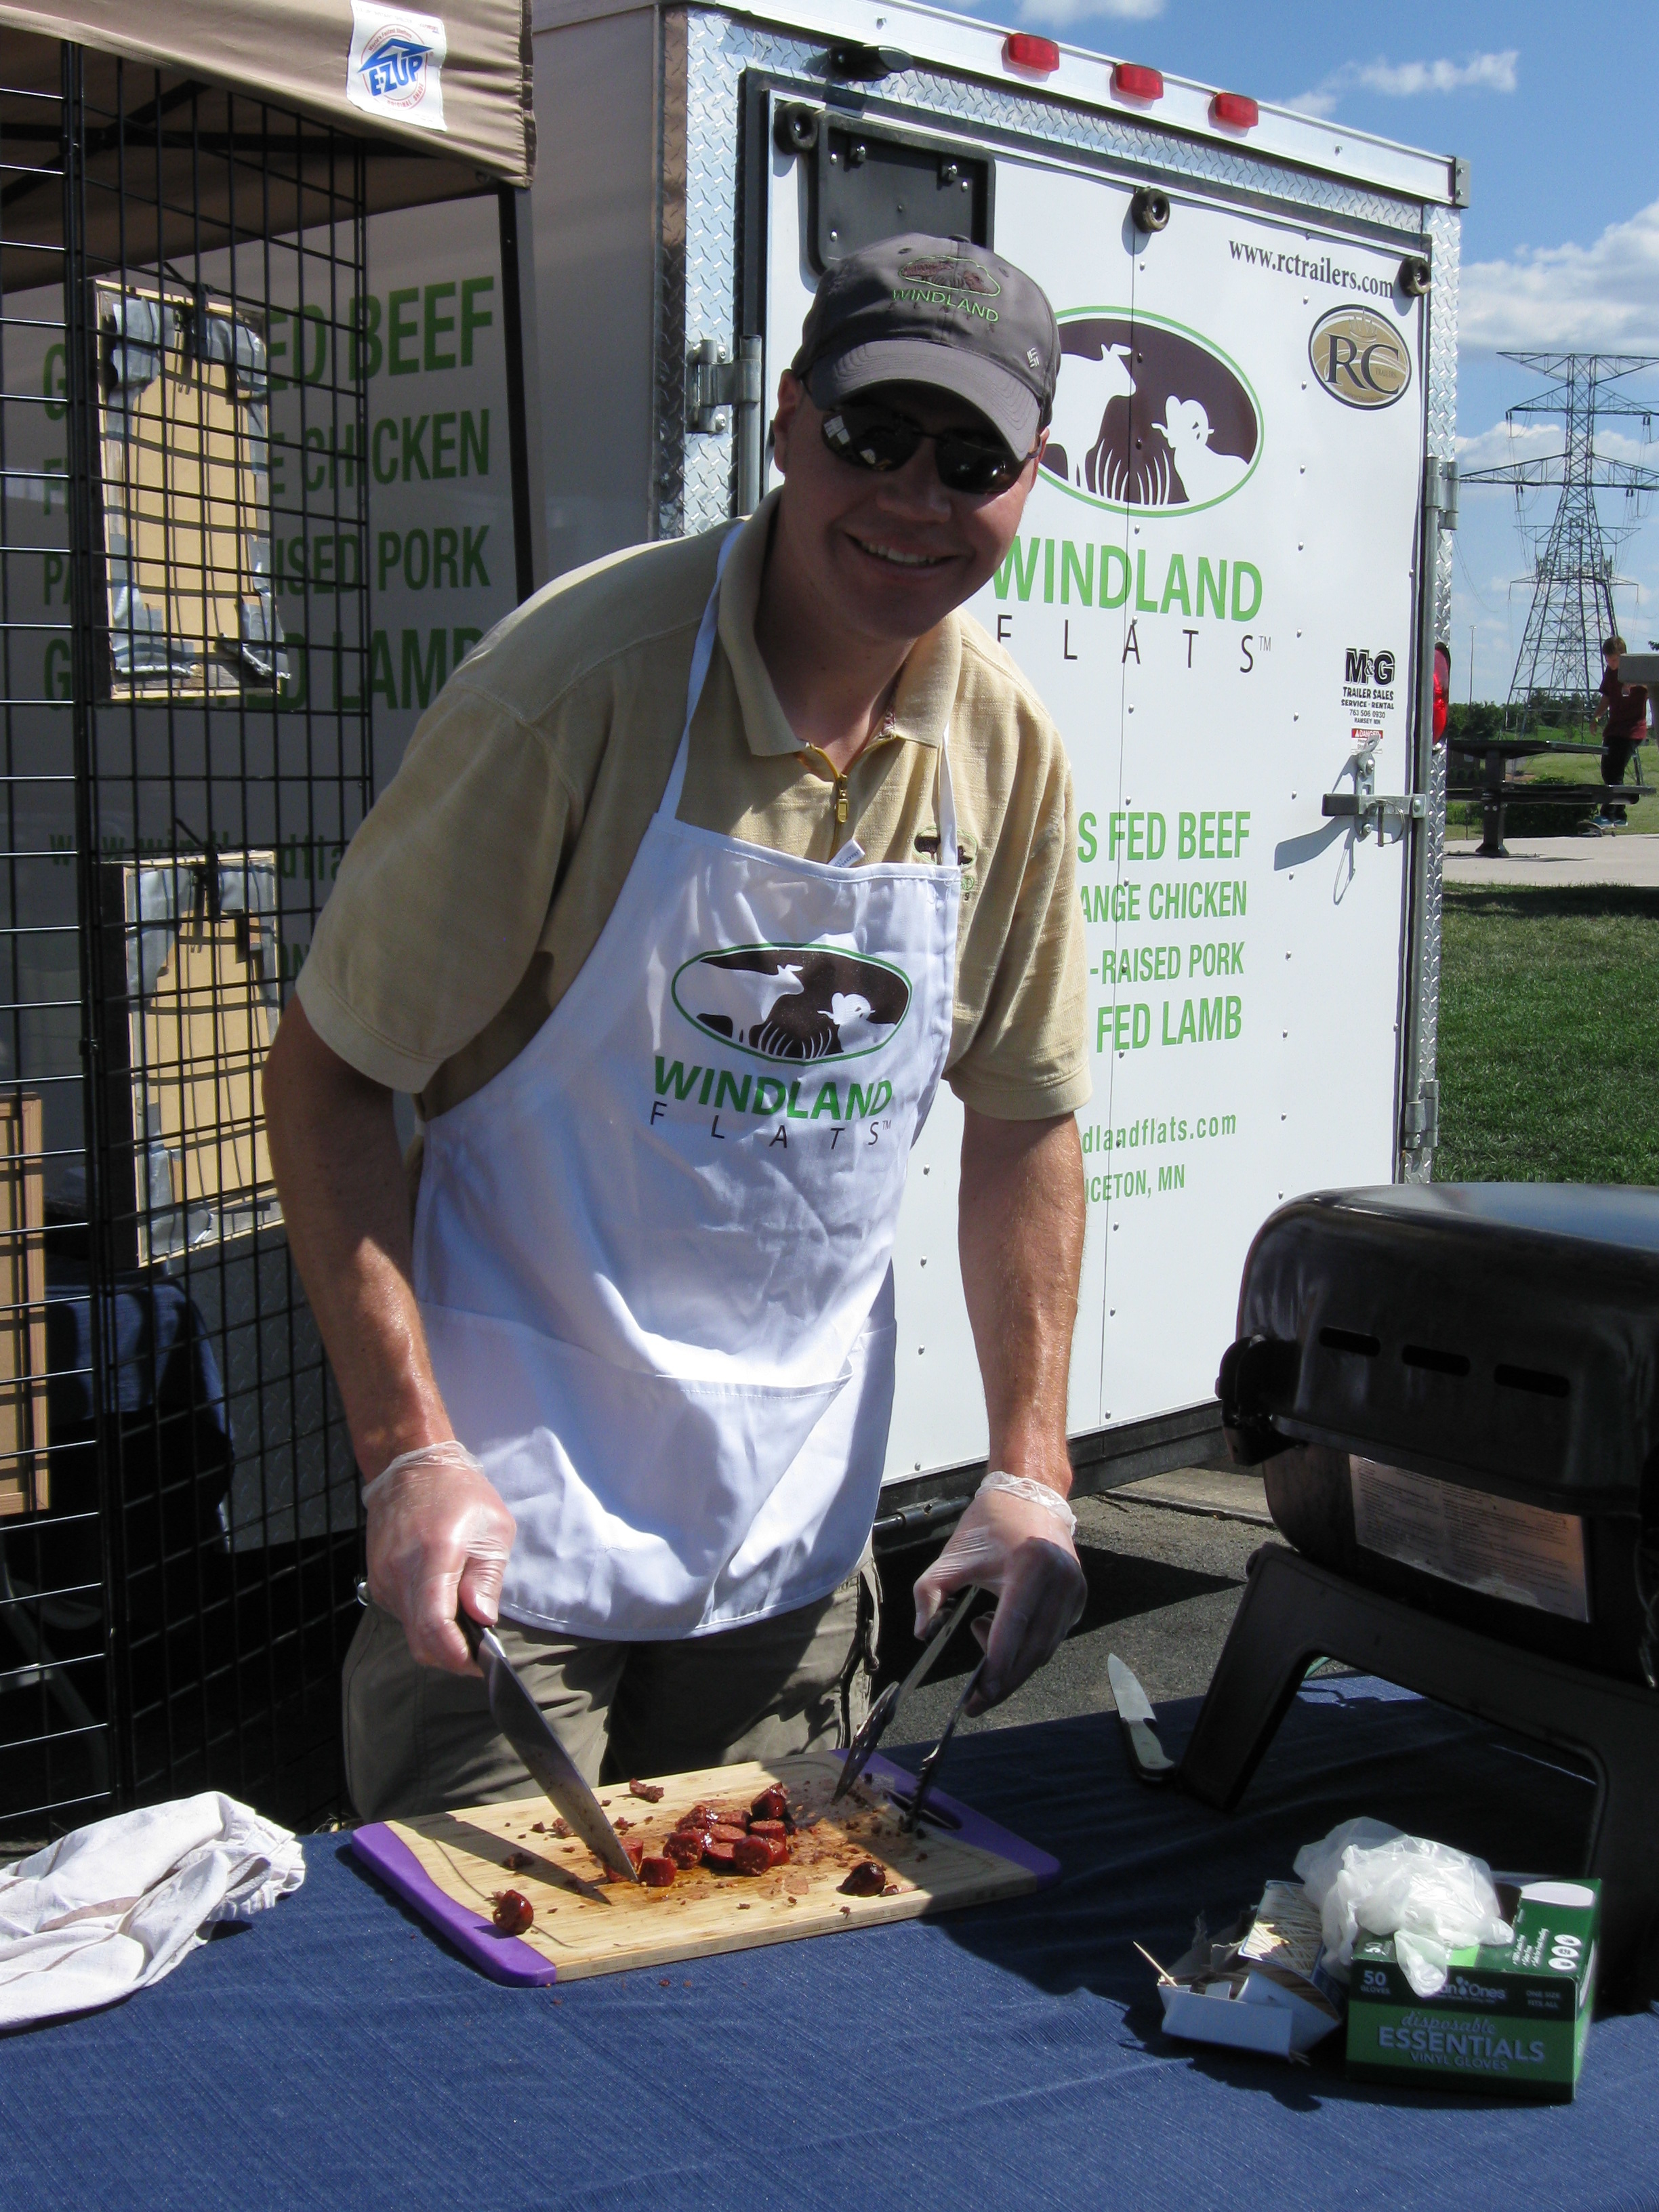 The Maple Grove Farmers Market also carries a large variety of meats, grown locally and ethically. Our vendors offer a variety of different cuts from beef, pork, chicken, lamb, fish, and more.